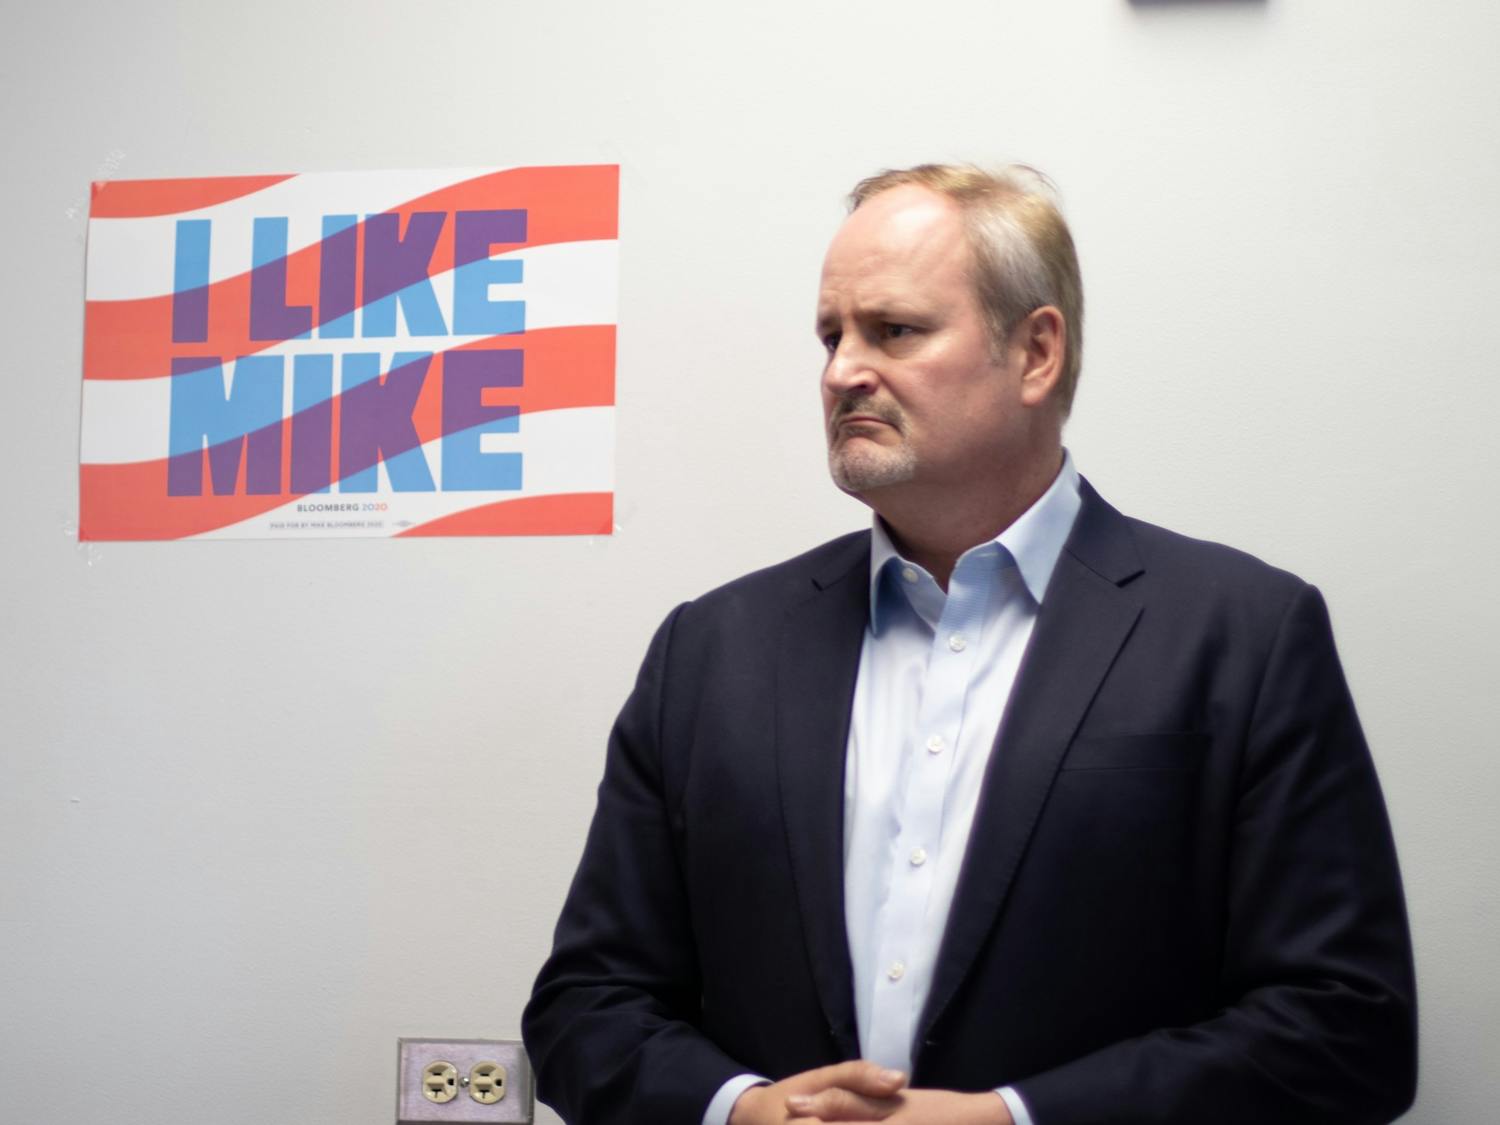 Tim O’Brien, senior adviser to Democratic presidential candidate Michael Bloomberg, visited the former New York City mayor's newly-opened campaign office in Chapel Hill to discuss policy and strategy with supporters. &nbsp;